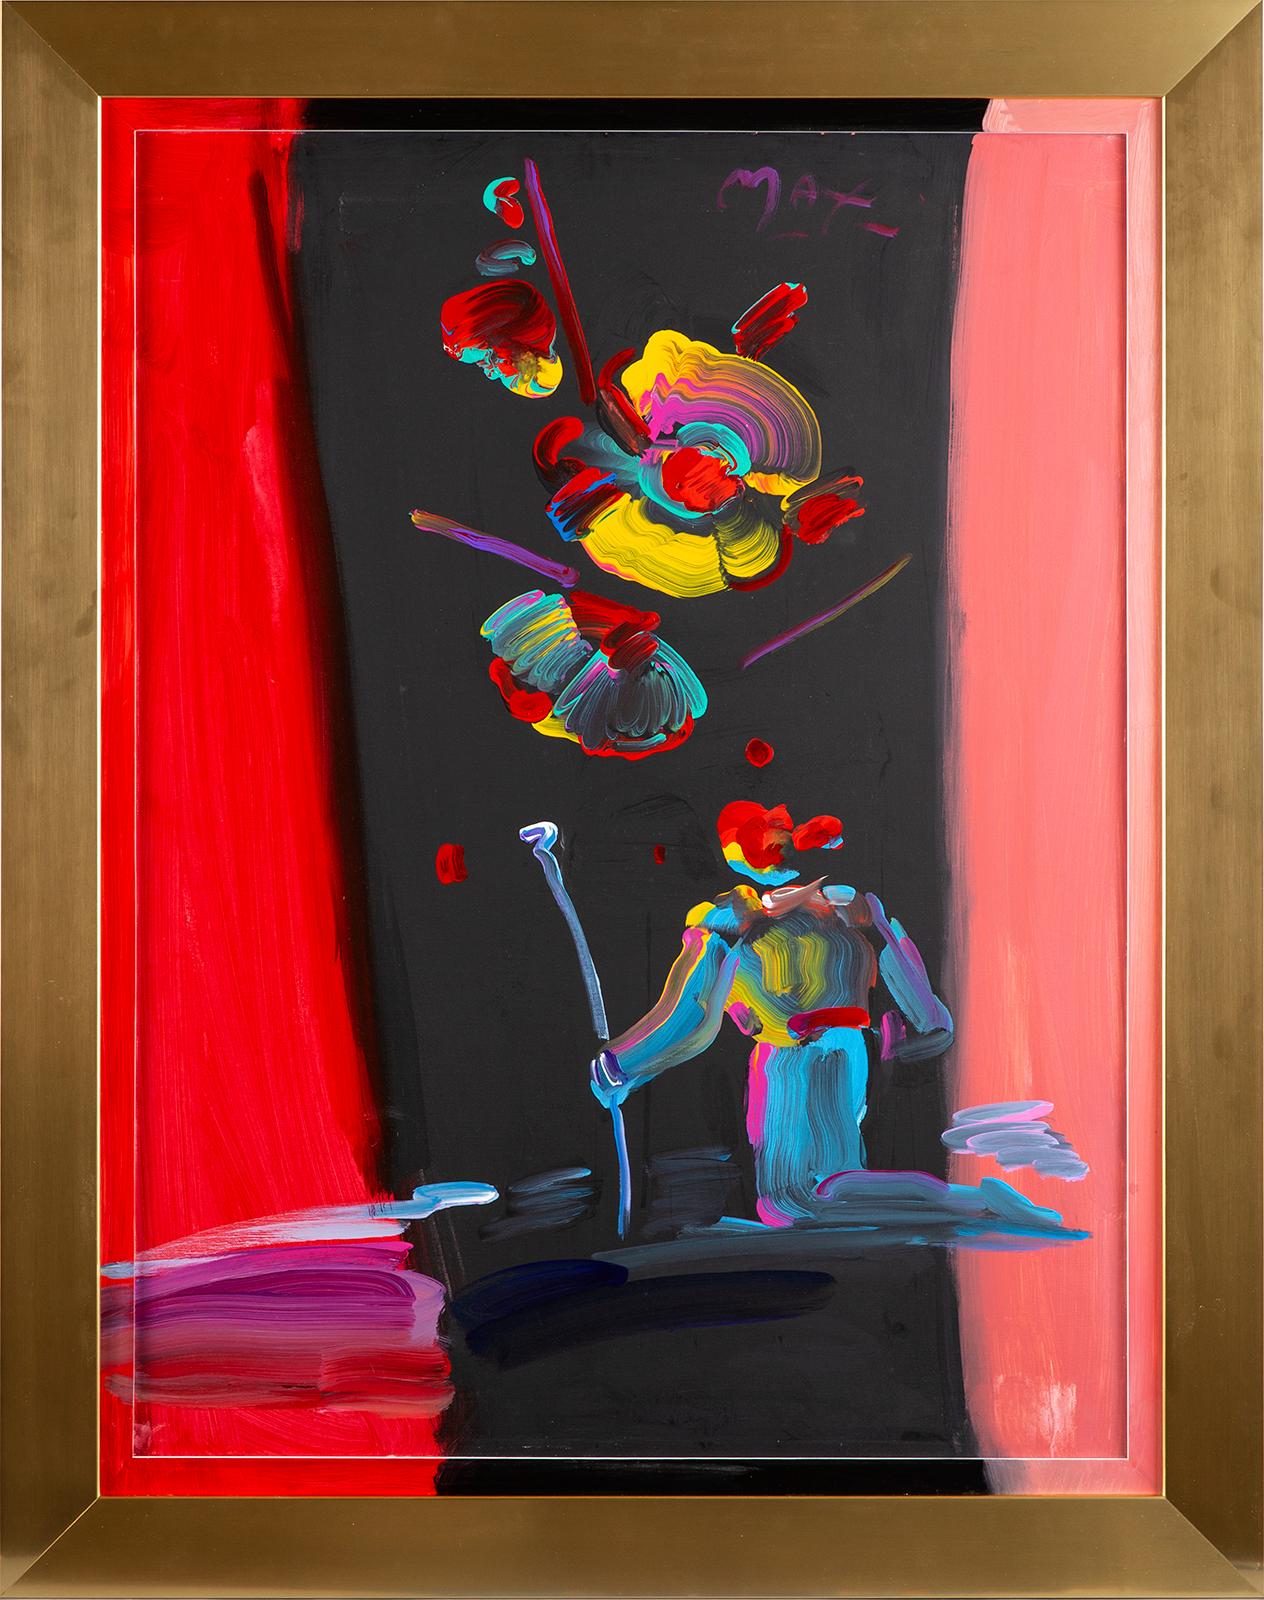 Artist: Peter Max
Title: R.S. Kneeling Sage II
Medium: Acrylic on canvas
Framing: Framed and Matted
Size: 40" x 30"
Inscription: Signed “Max” in upper right
Peter Max studio reference number: 8290
Condition: Museum quality
Documentation: Includes